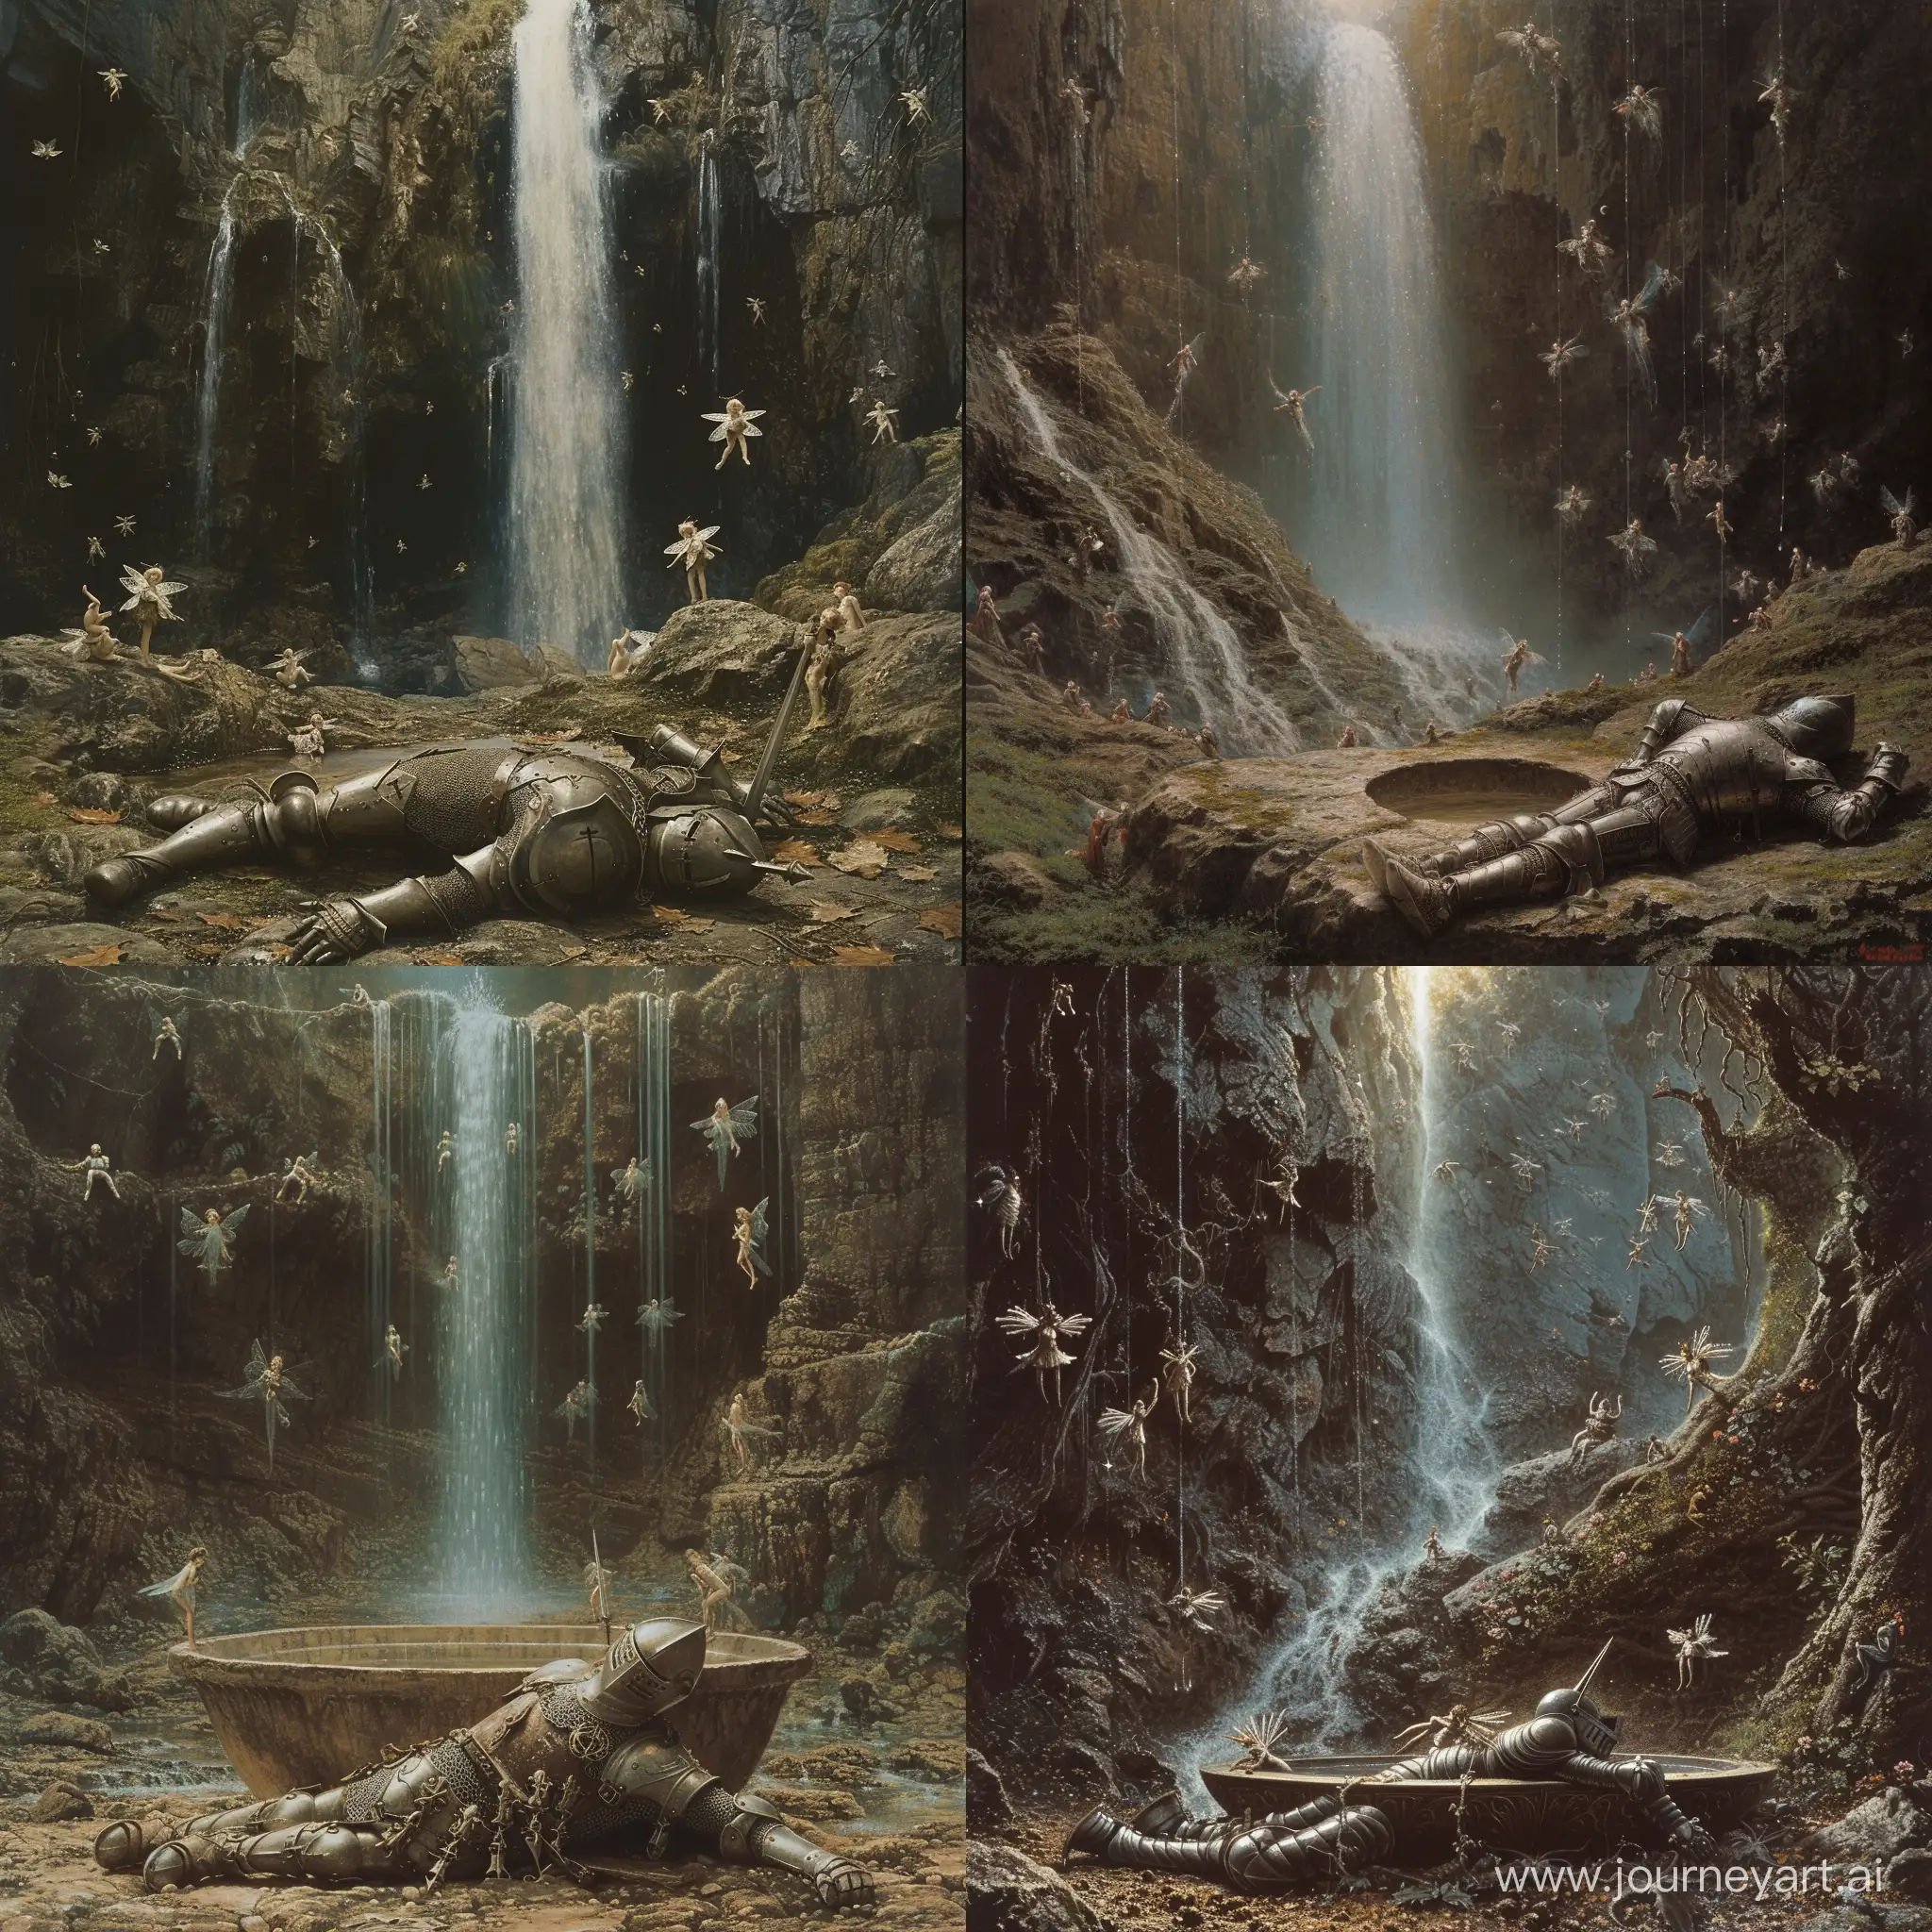 a knight lying, taking its last breath in a  A hidden basin at the base of a majestic waterfall, little fairies everywhere, daylight ,1970's dark fantasy style, gritty, dark, vintage, detailed